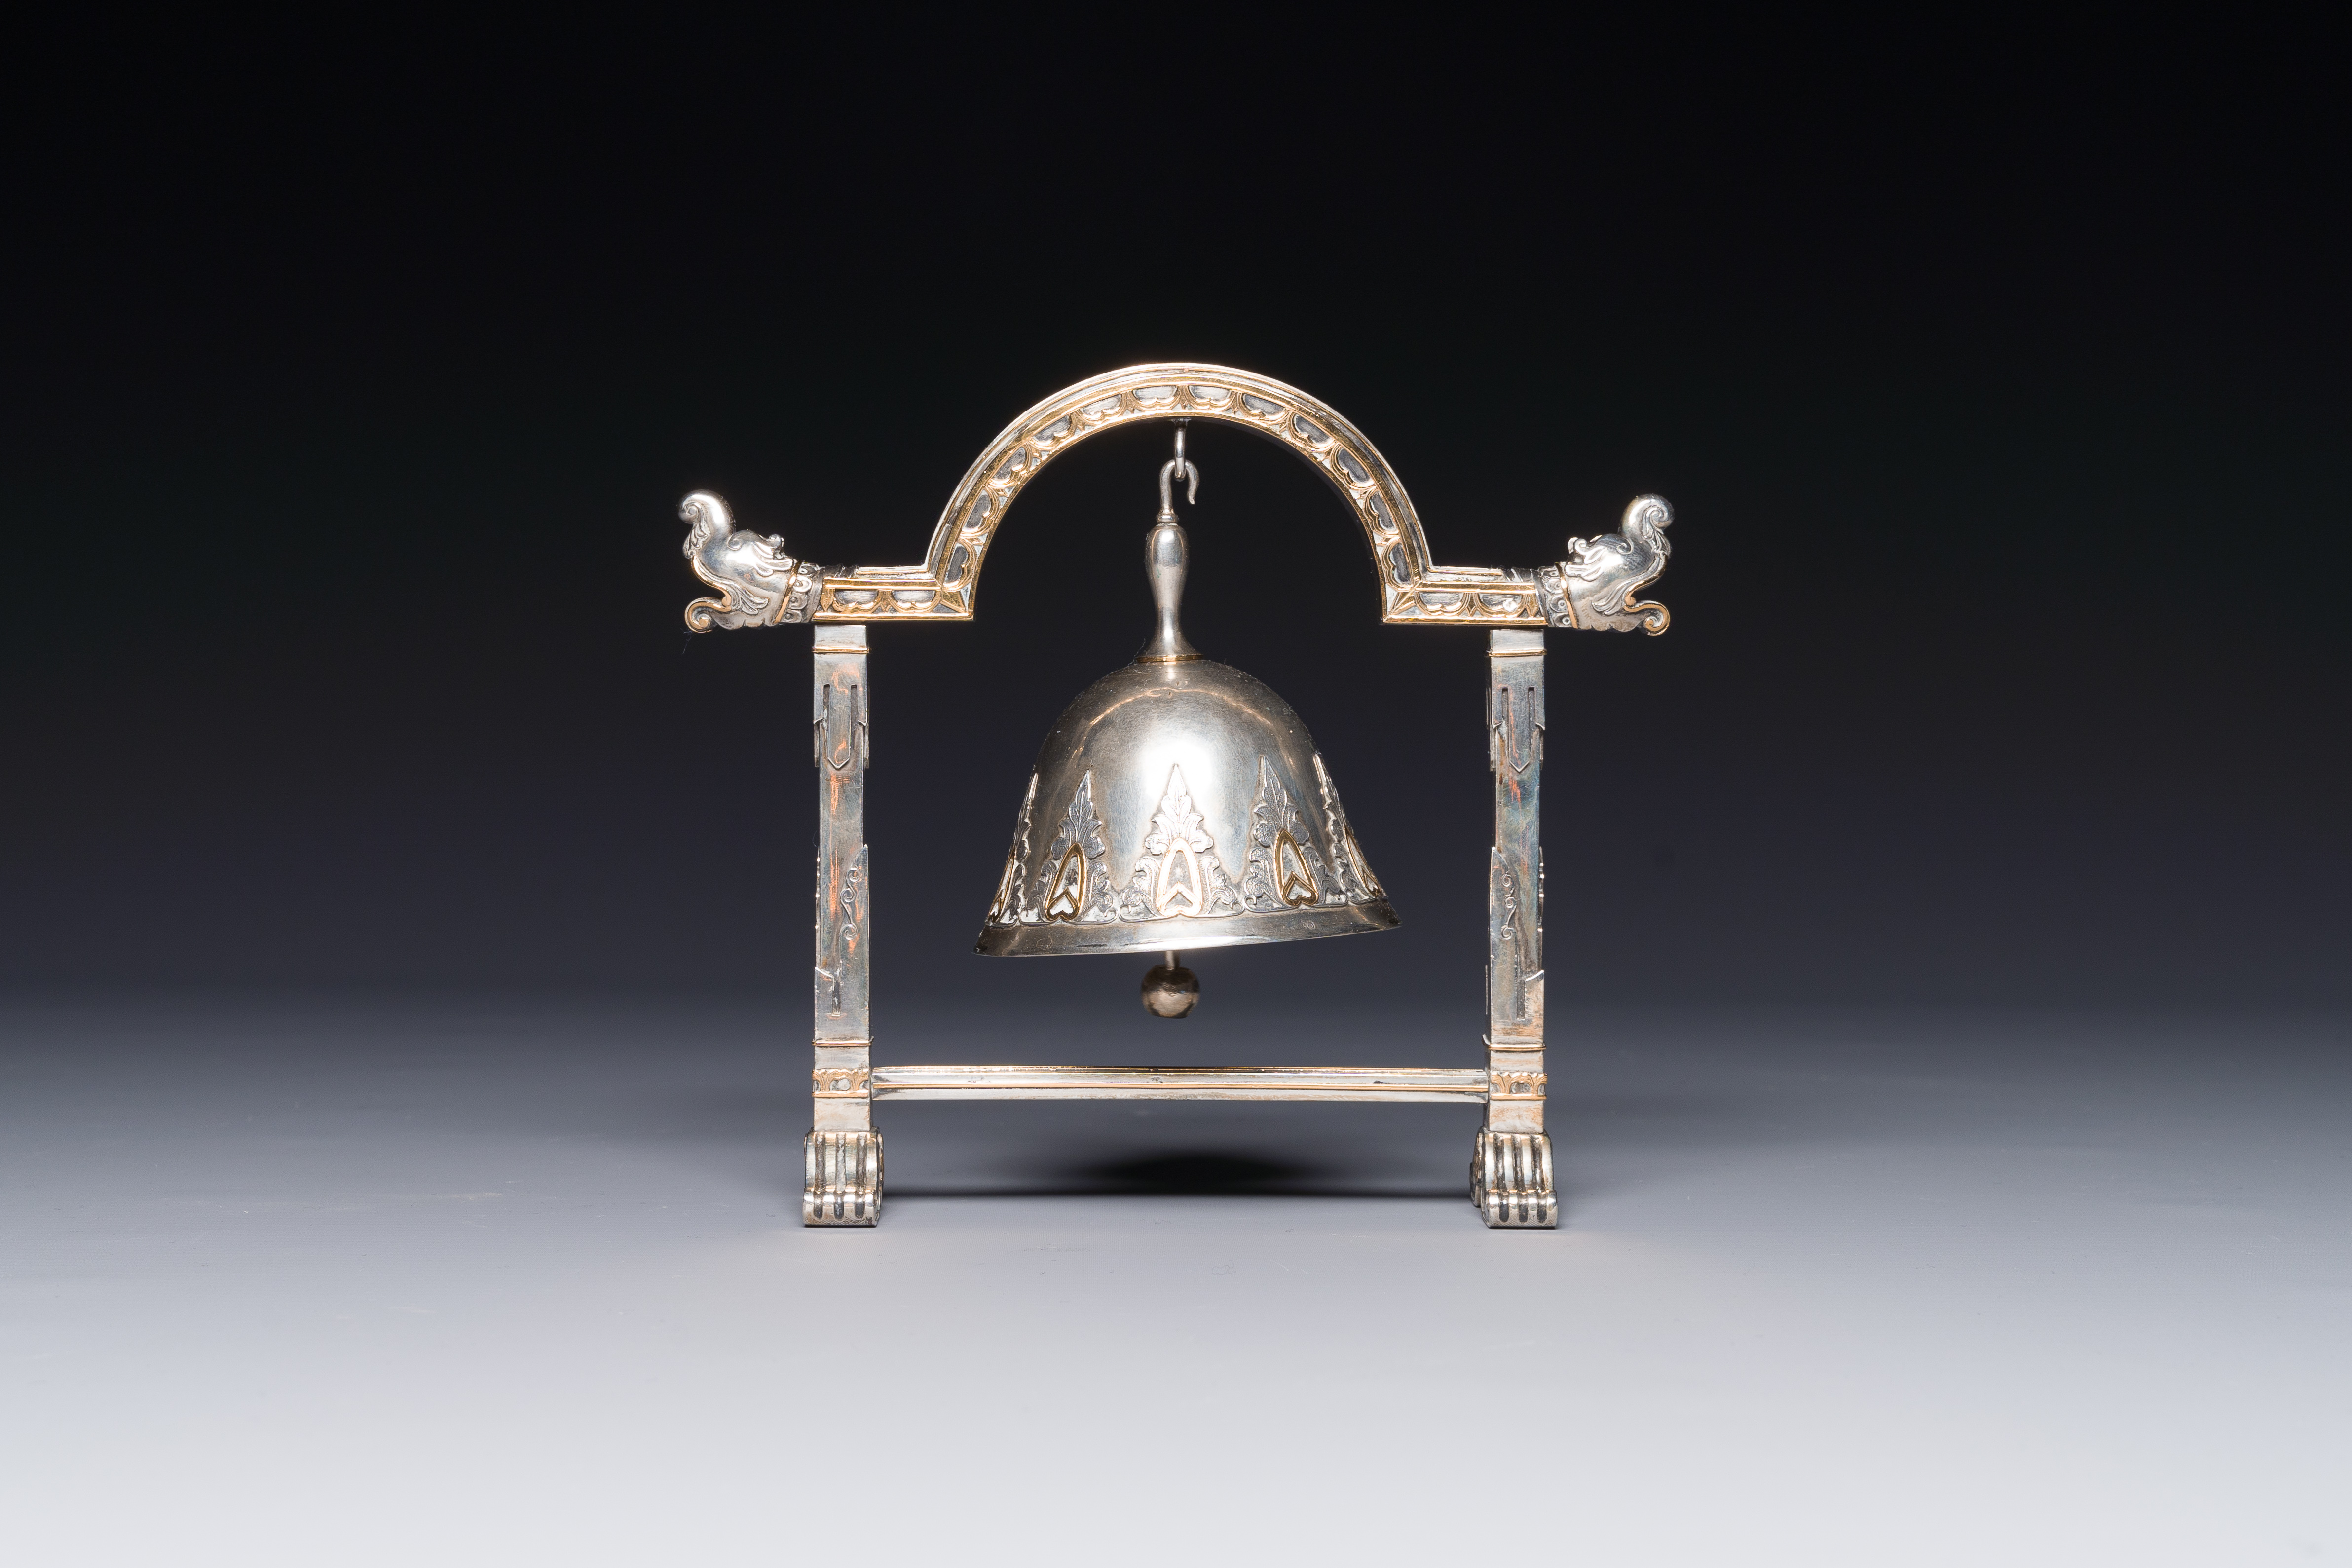 A fine parcel-gilt silver table bell or miniature gong, Southeast Asia, early 20th C. - Image 5 of 12